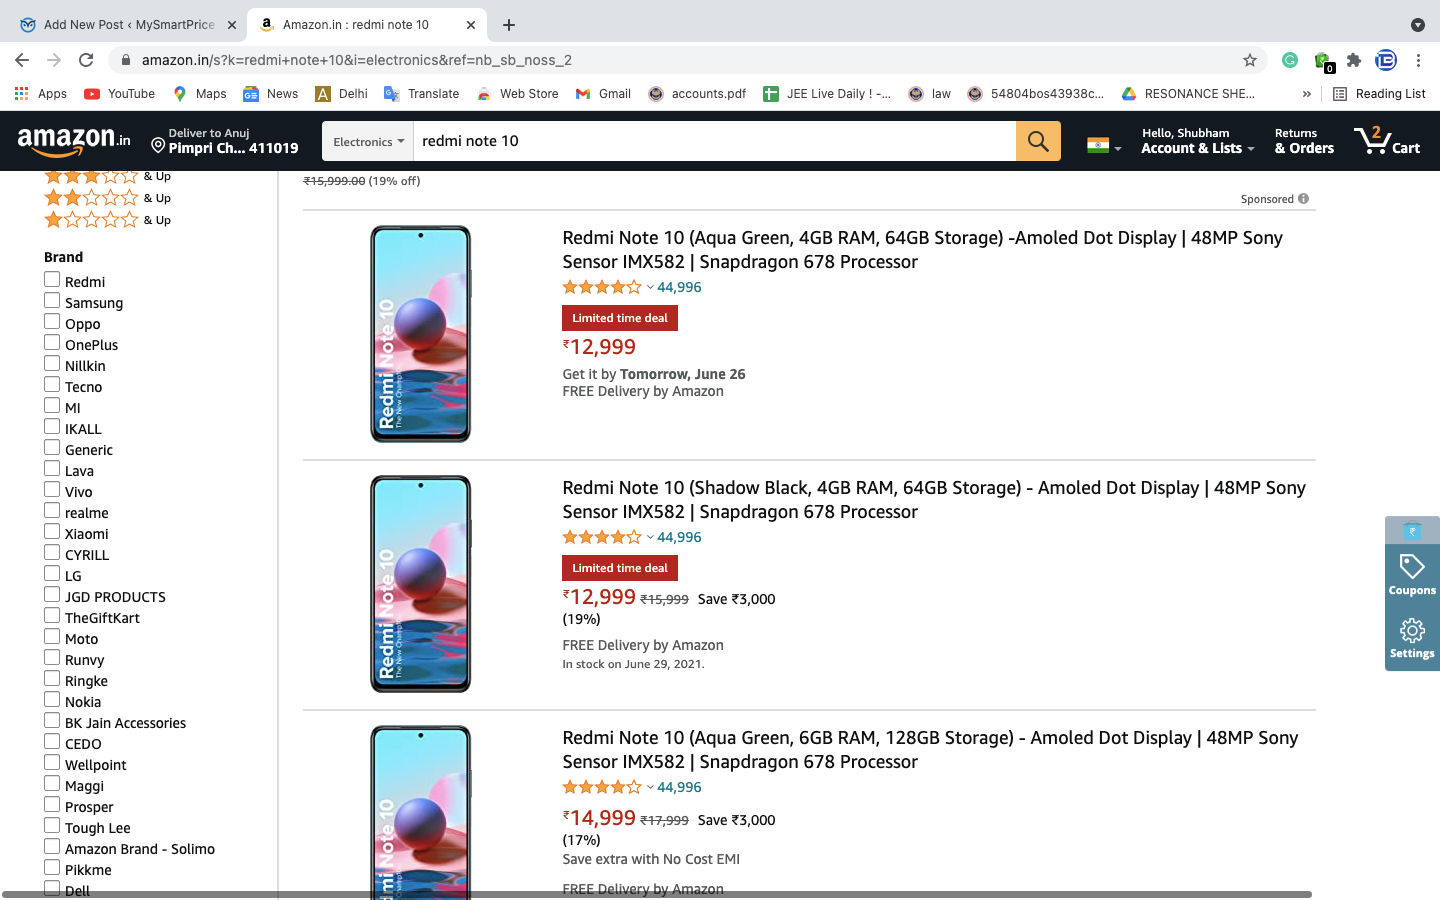 Redmi Note Price Rs 12,999